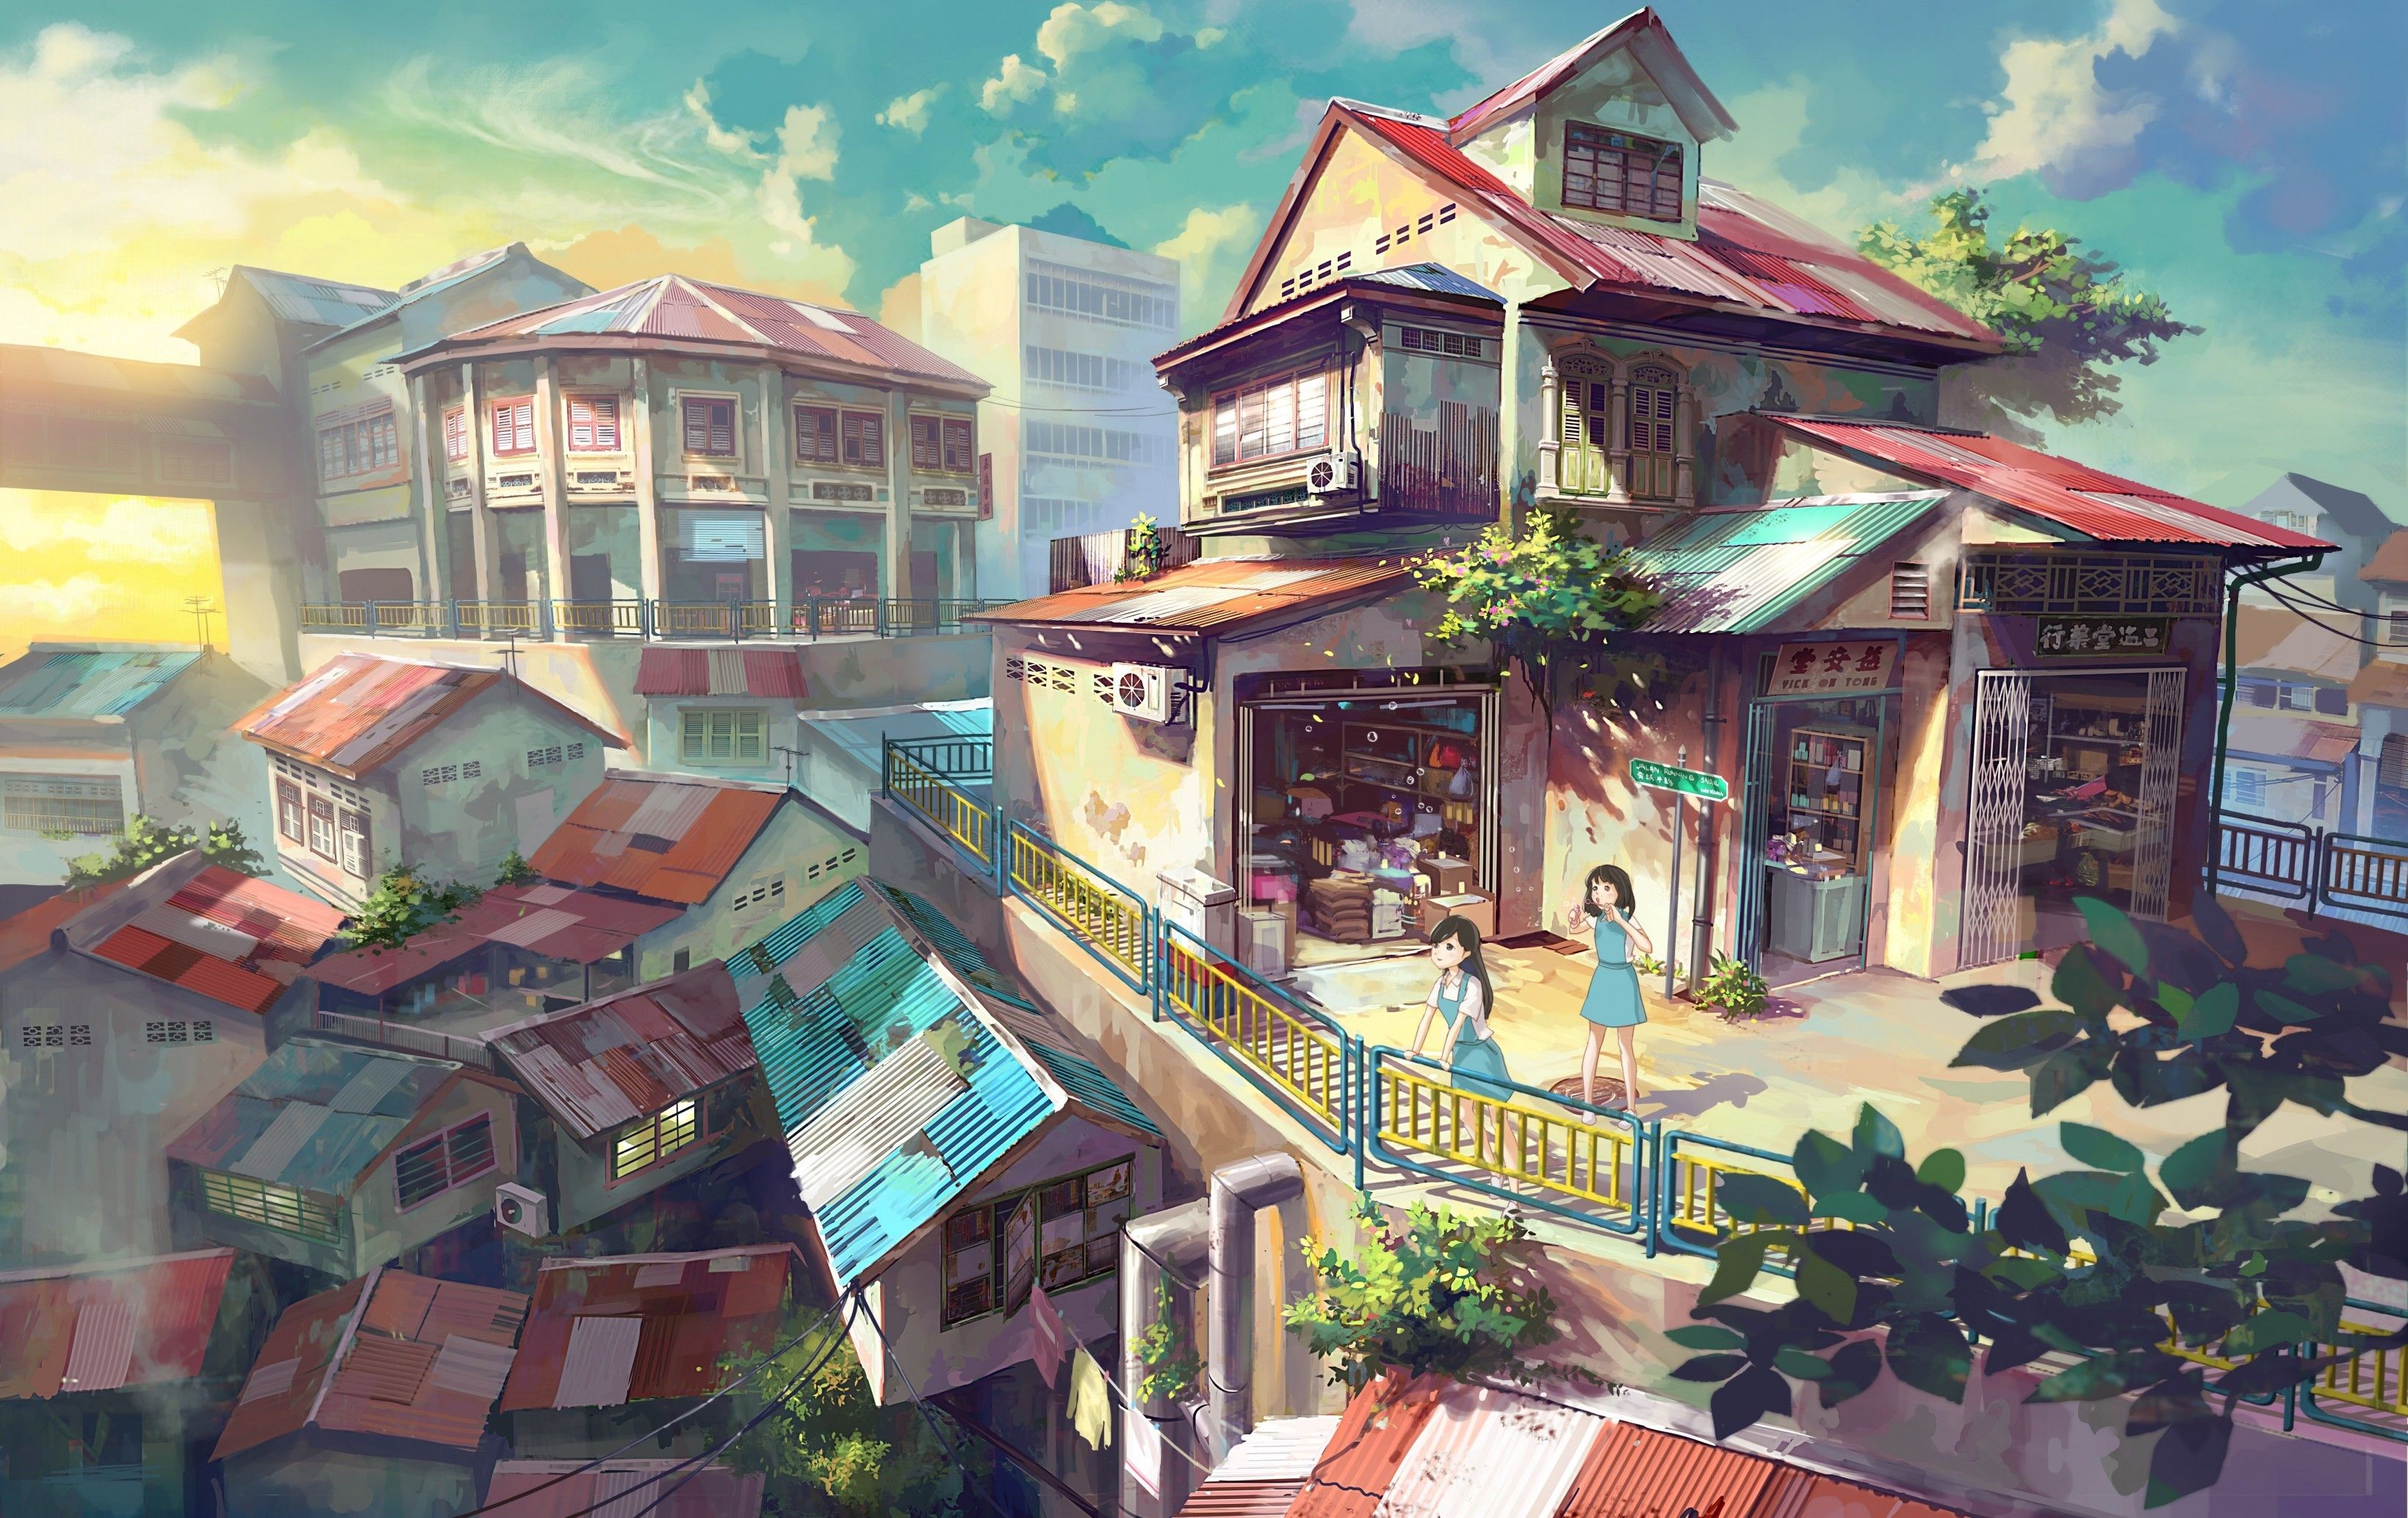 Download 3278x2067 Anime Buildings, Summer, Girls, Clouds, Artwork, Sunset, Scenic Wallpaper